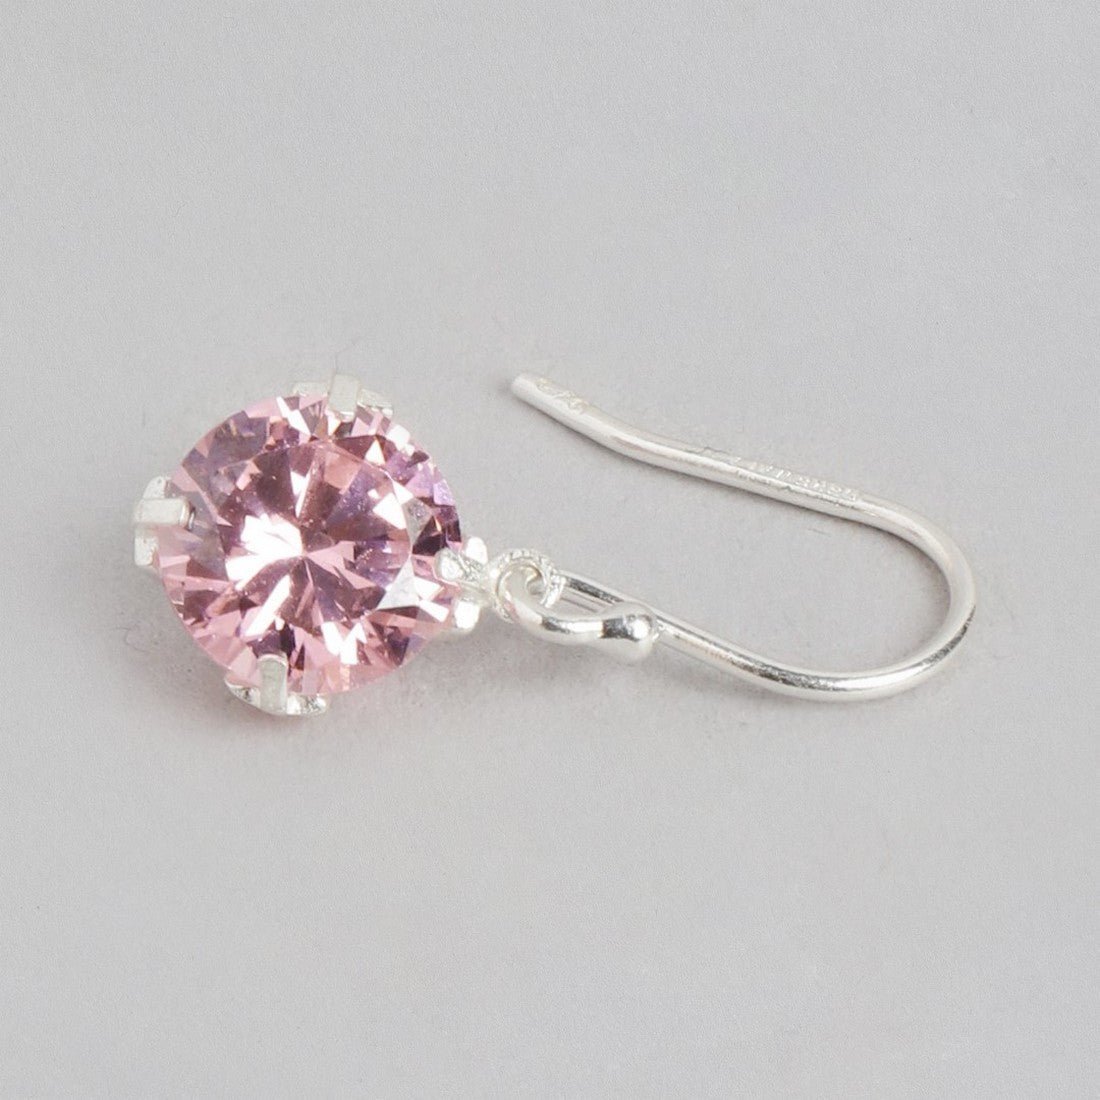 Blushing Petals: Rhodium-Plated Silver Dangle Earrings with Pink Cubic Zirconia